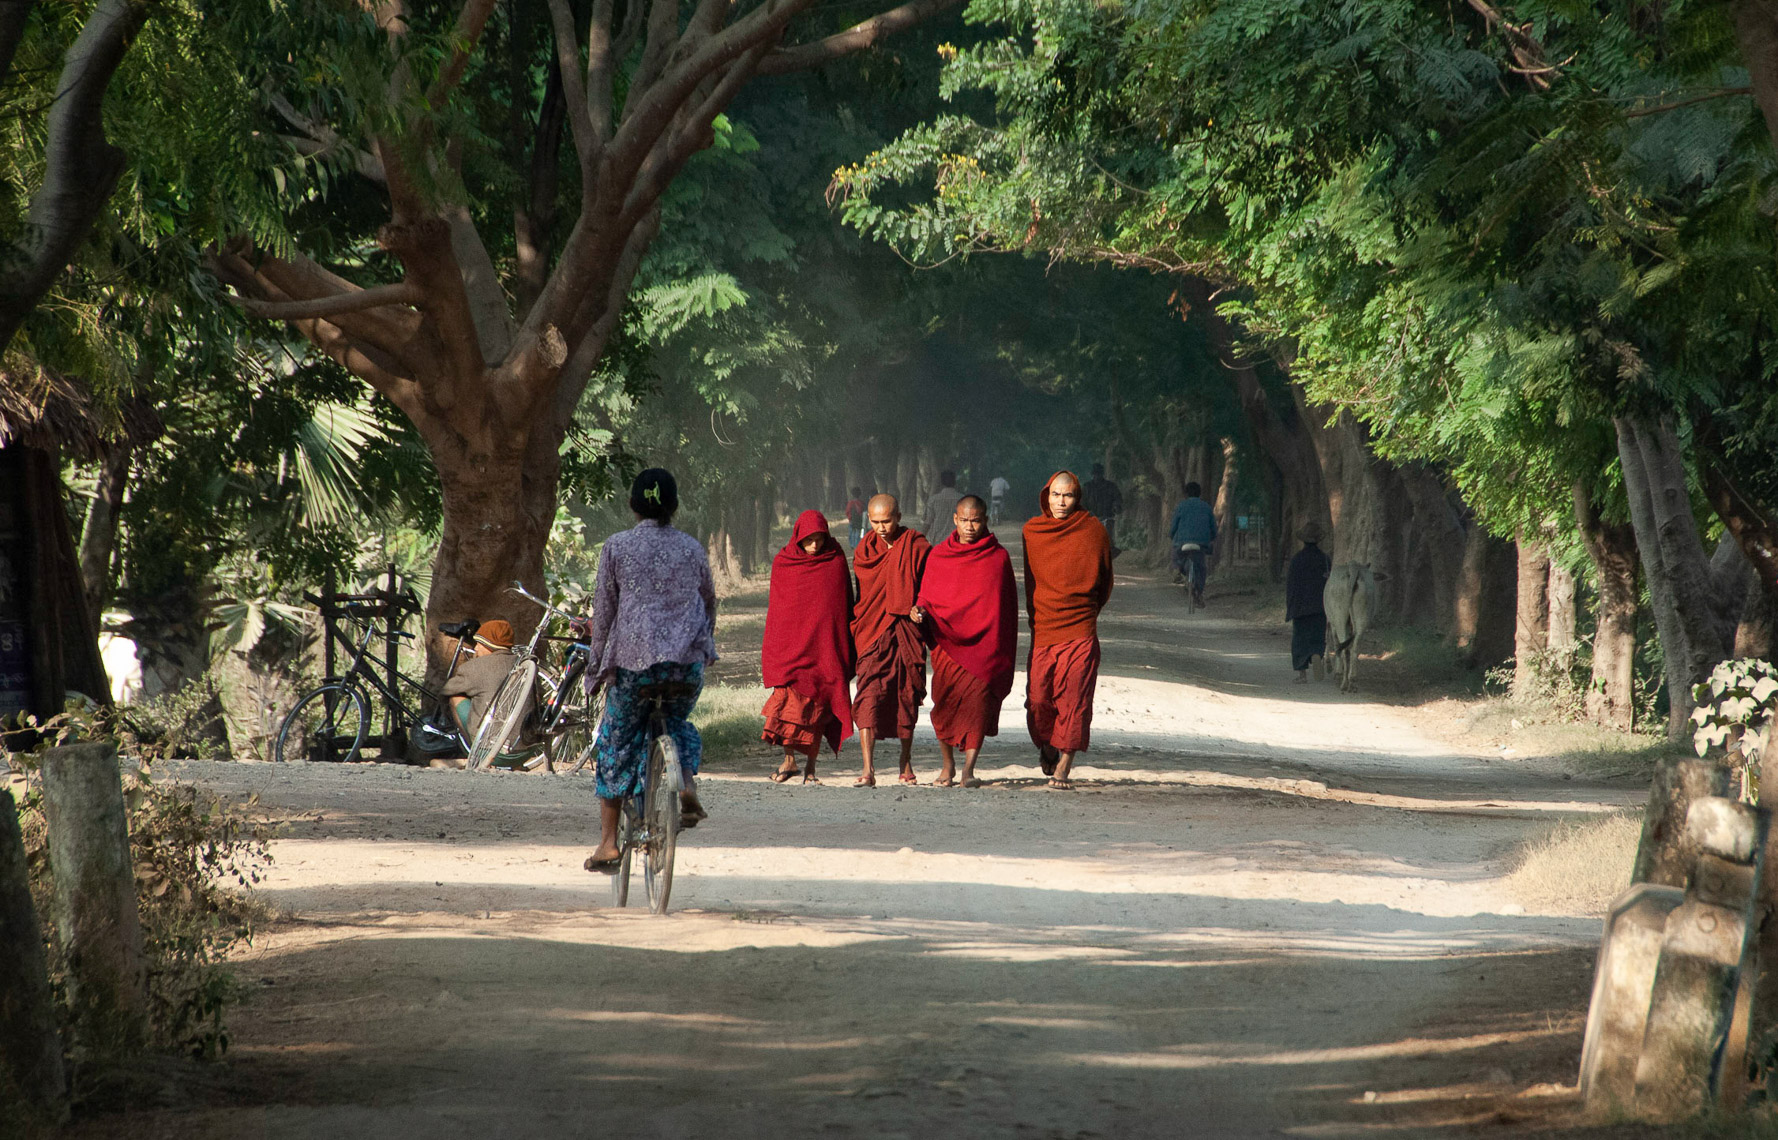   Monks on a Mission-  Myanmar